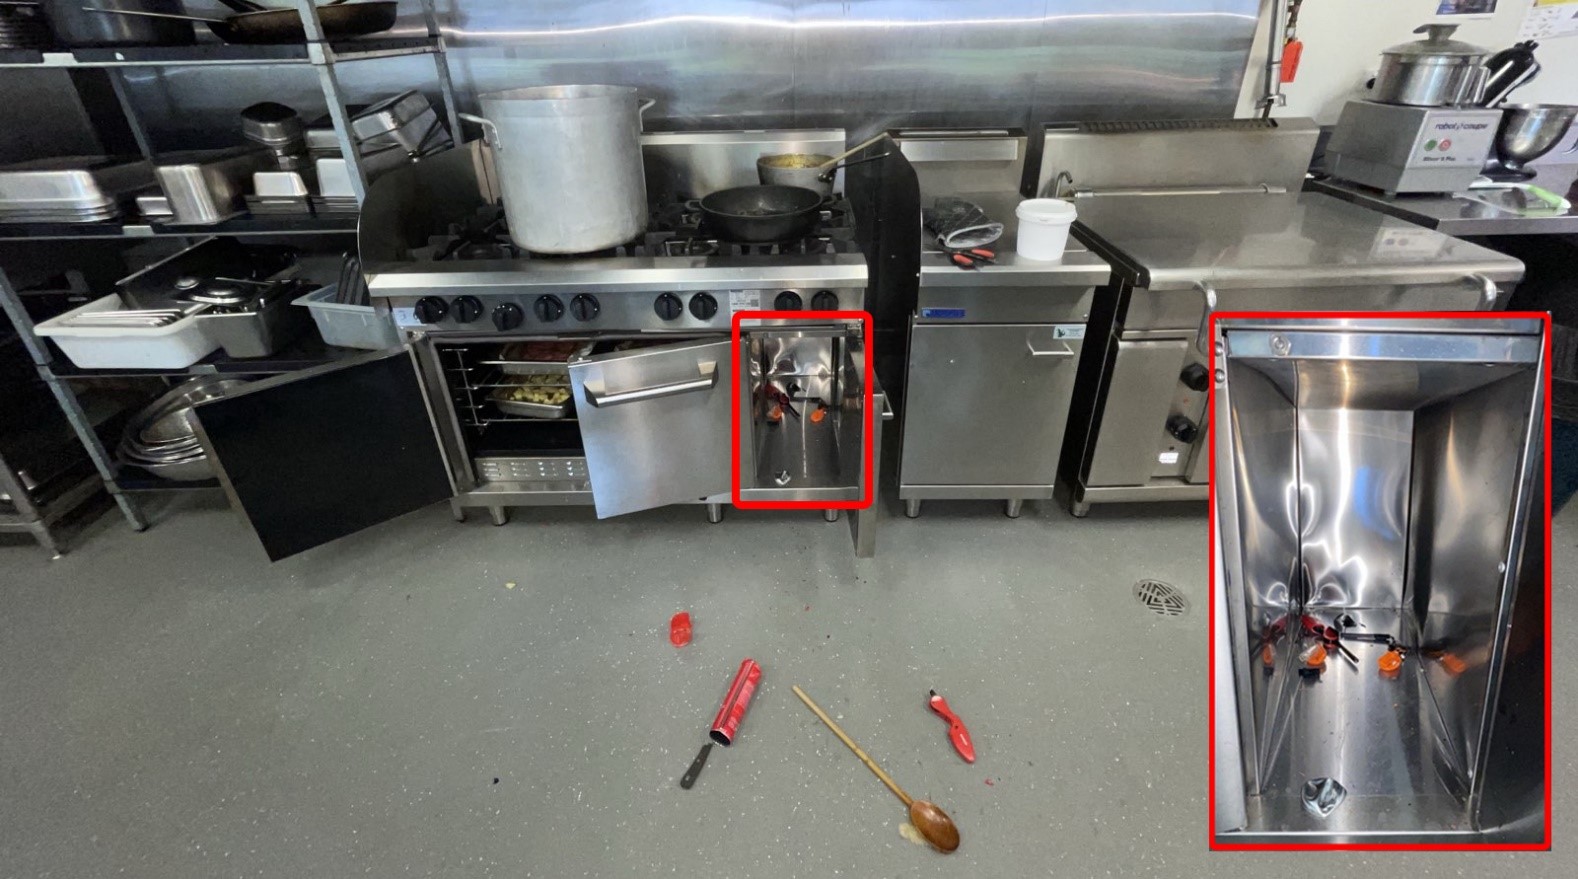 The image shows the oven storage's compartment that was damaged due to heat from the butane gas canister which was stored in it. 